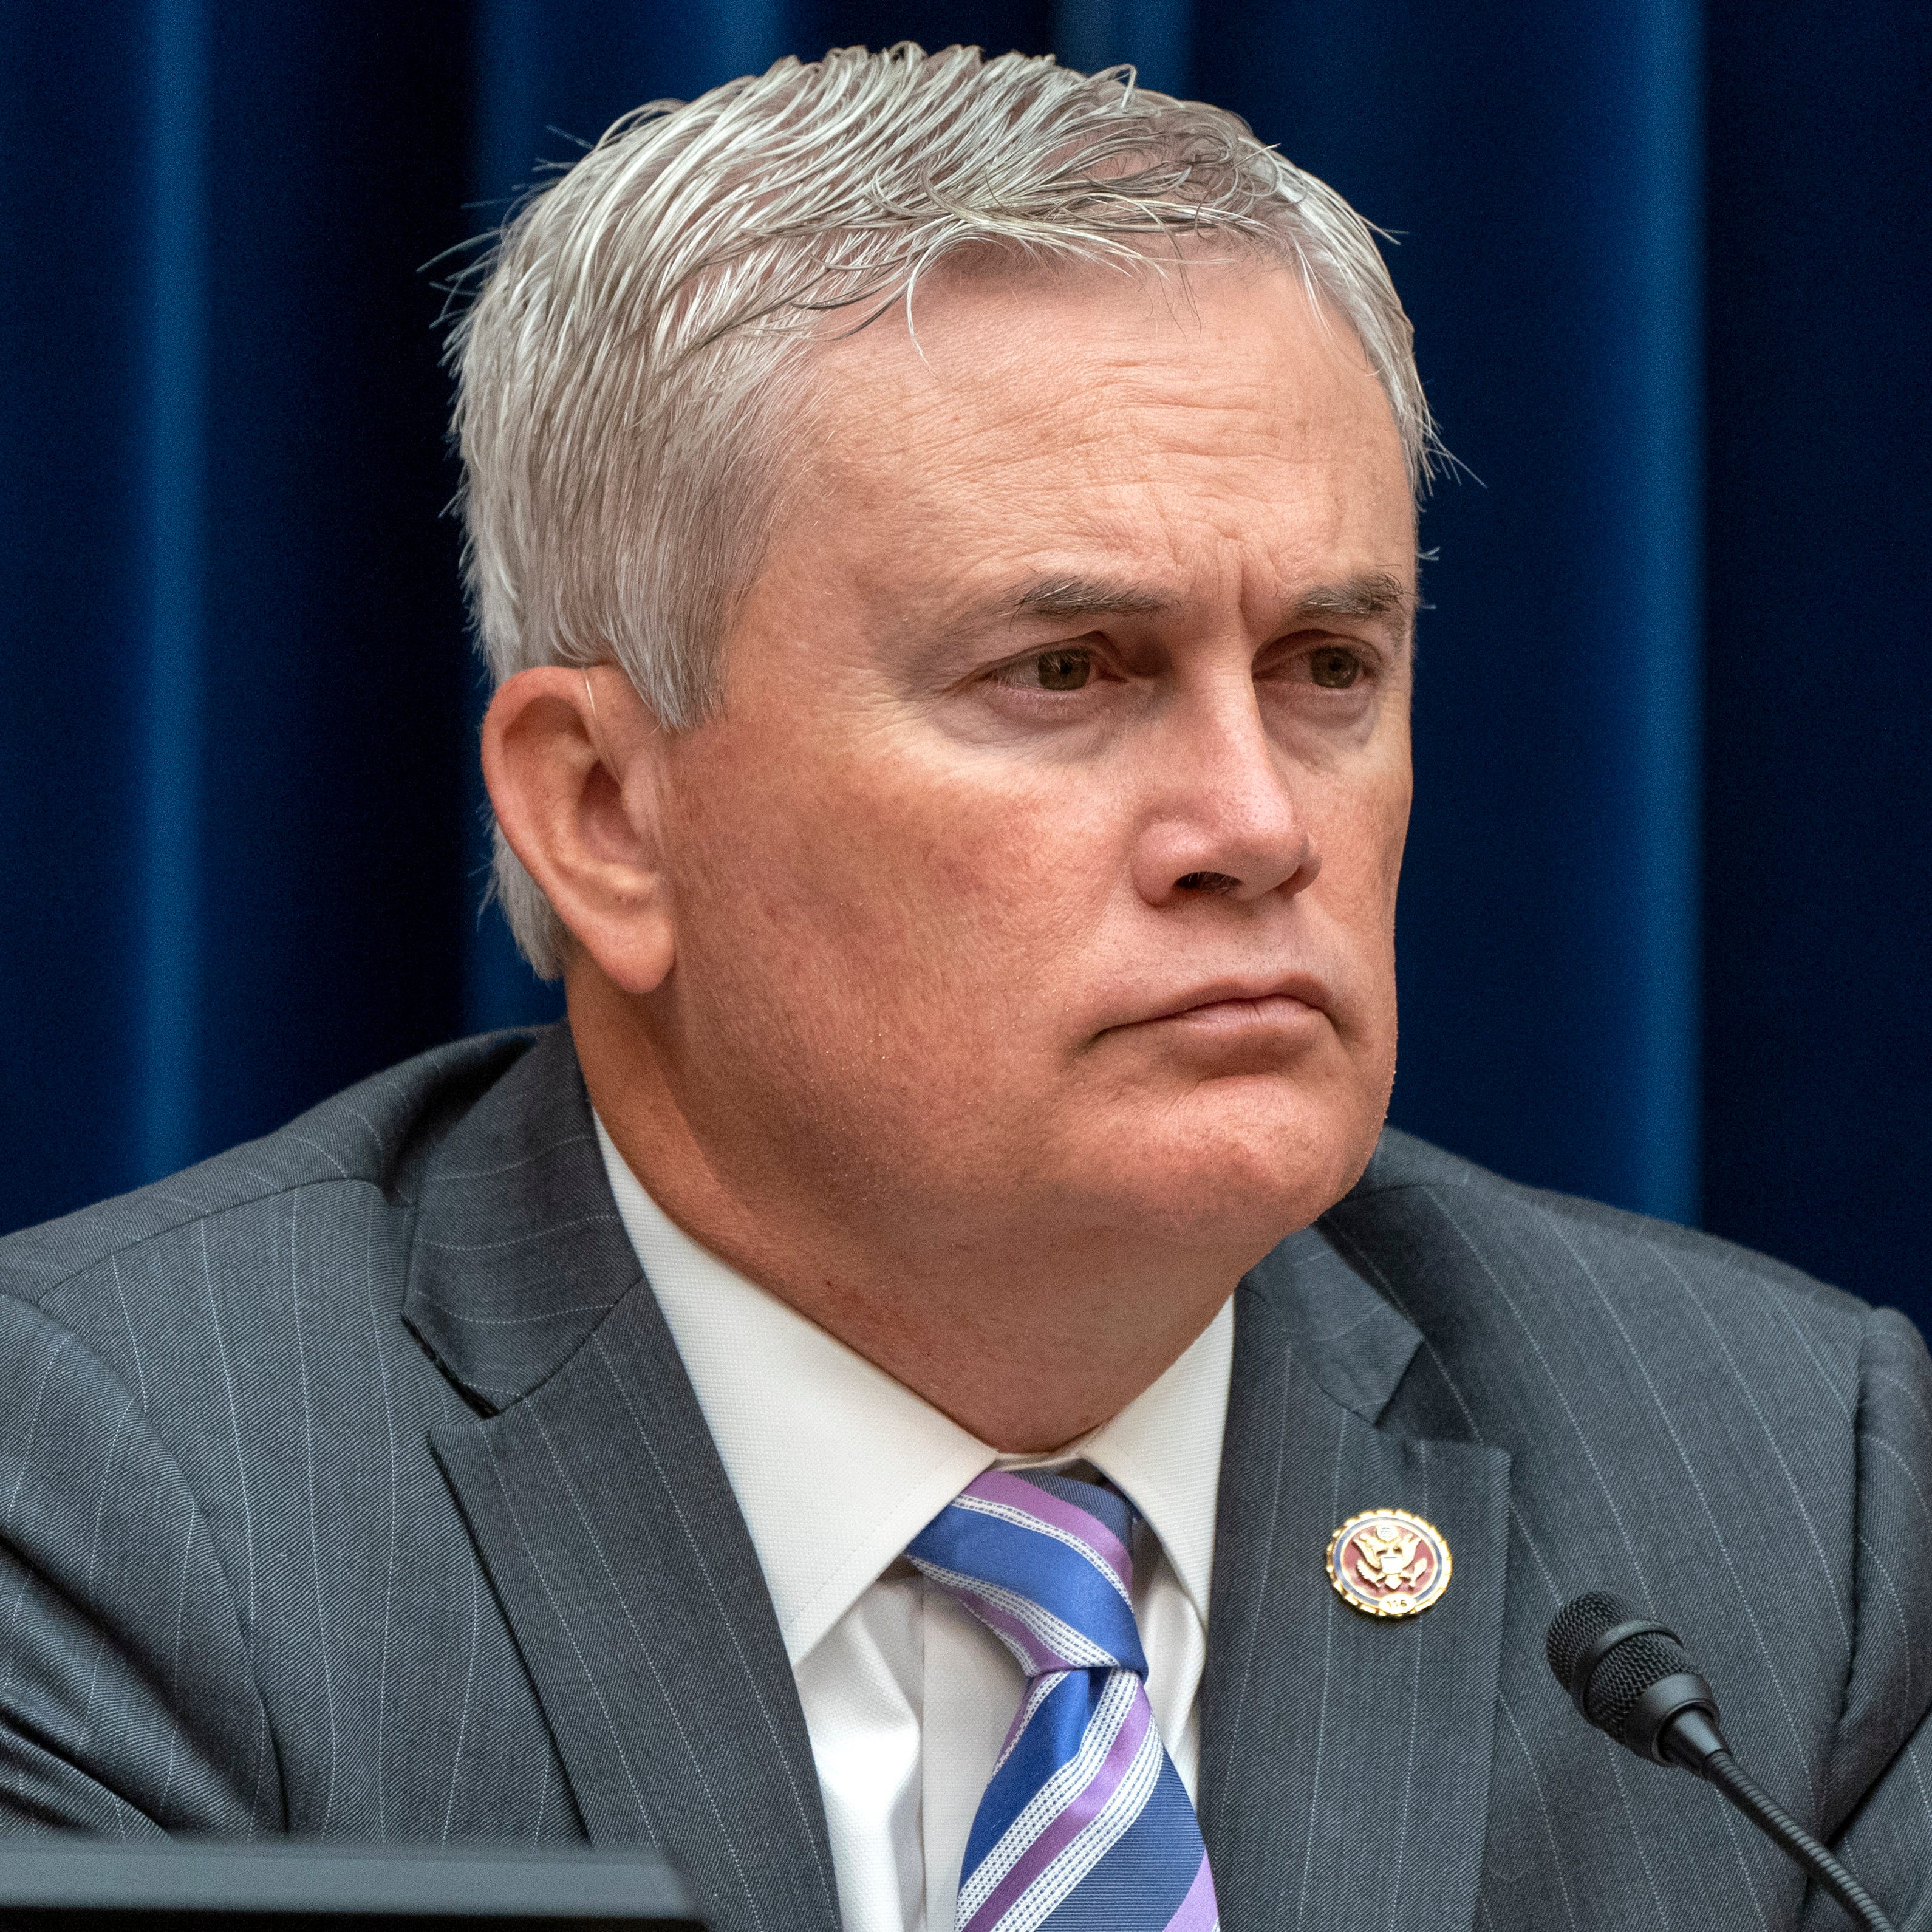 FILE - U.S. House Committee for Oversight and Reform ranking member Rep. James Comer Jr., R-Ky., listens during a hearing on the Washington Commanders' workplace conduct, Wednesday, June 22, 2022, on Capitol Hill in Washington. The congressional investigation of the NFL's Washington Commanders will end when Republicans take over early next year. Comer issued a statement Thursday, Nov. 17, 2022, saying simply, 'It's over." (AP Photo/Jacquelyn Martin)